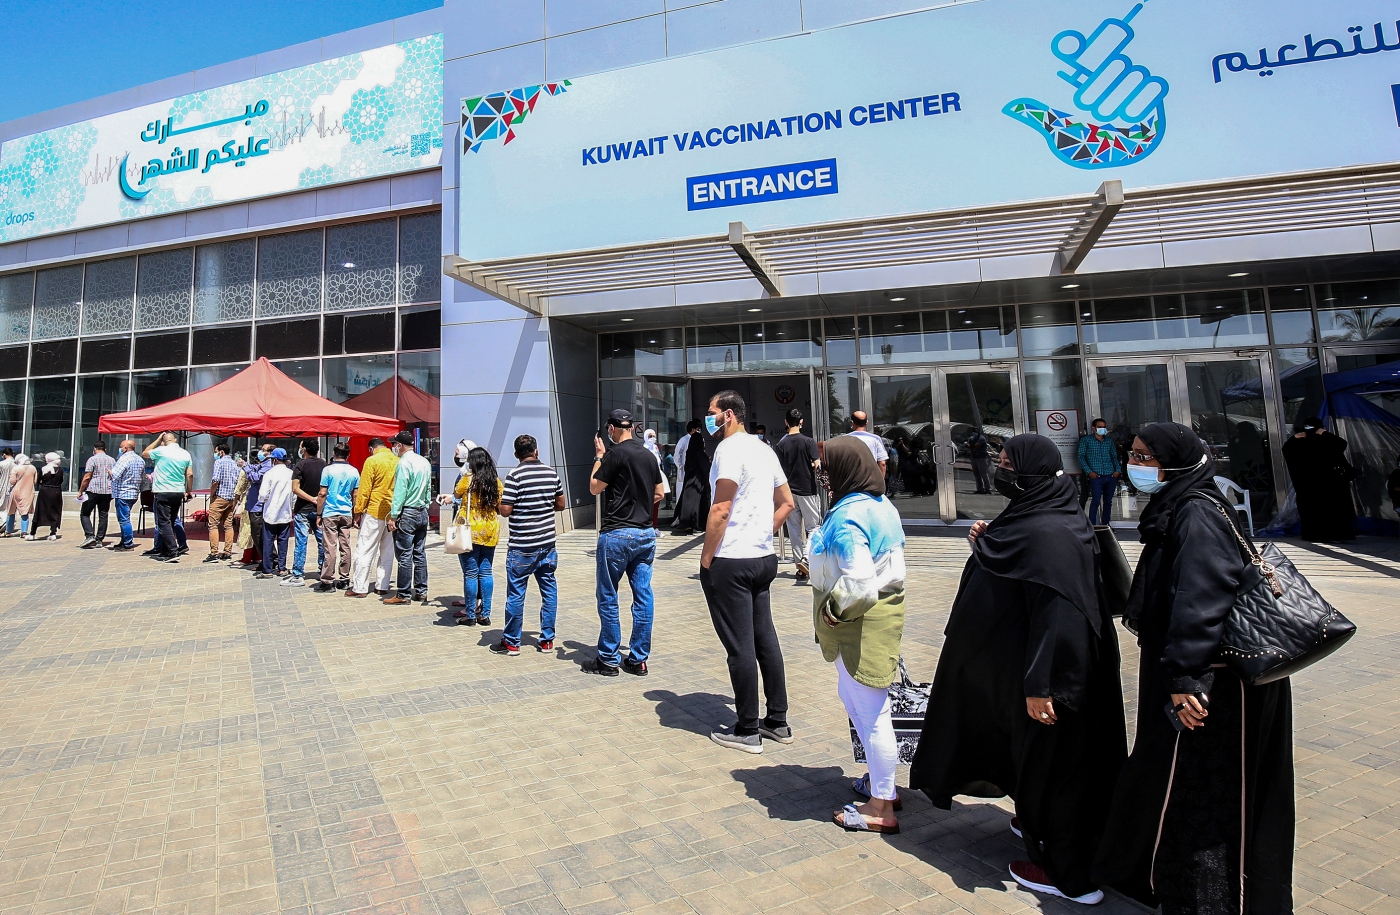 A queue in Kuwait for the Covid vaccine